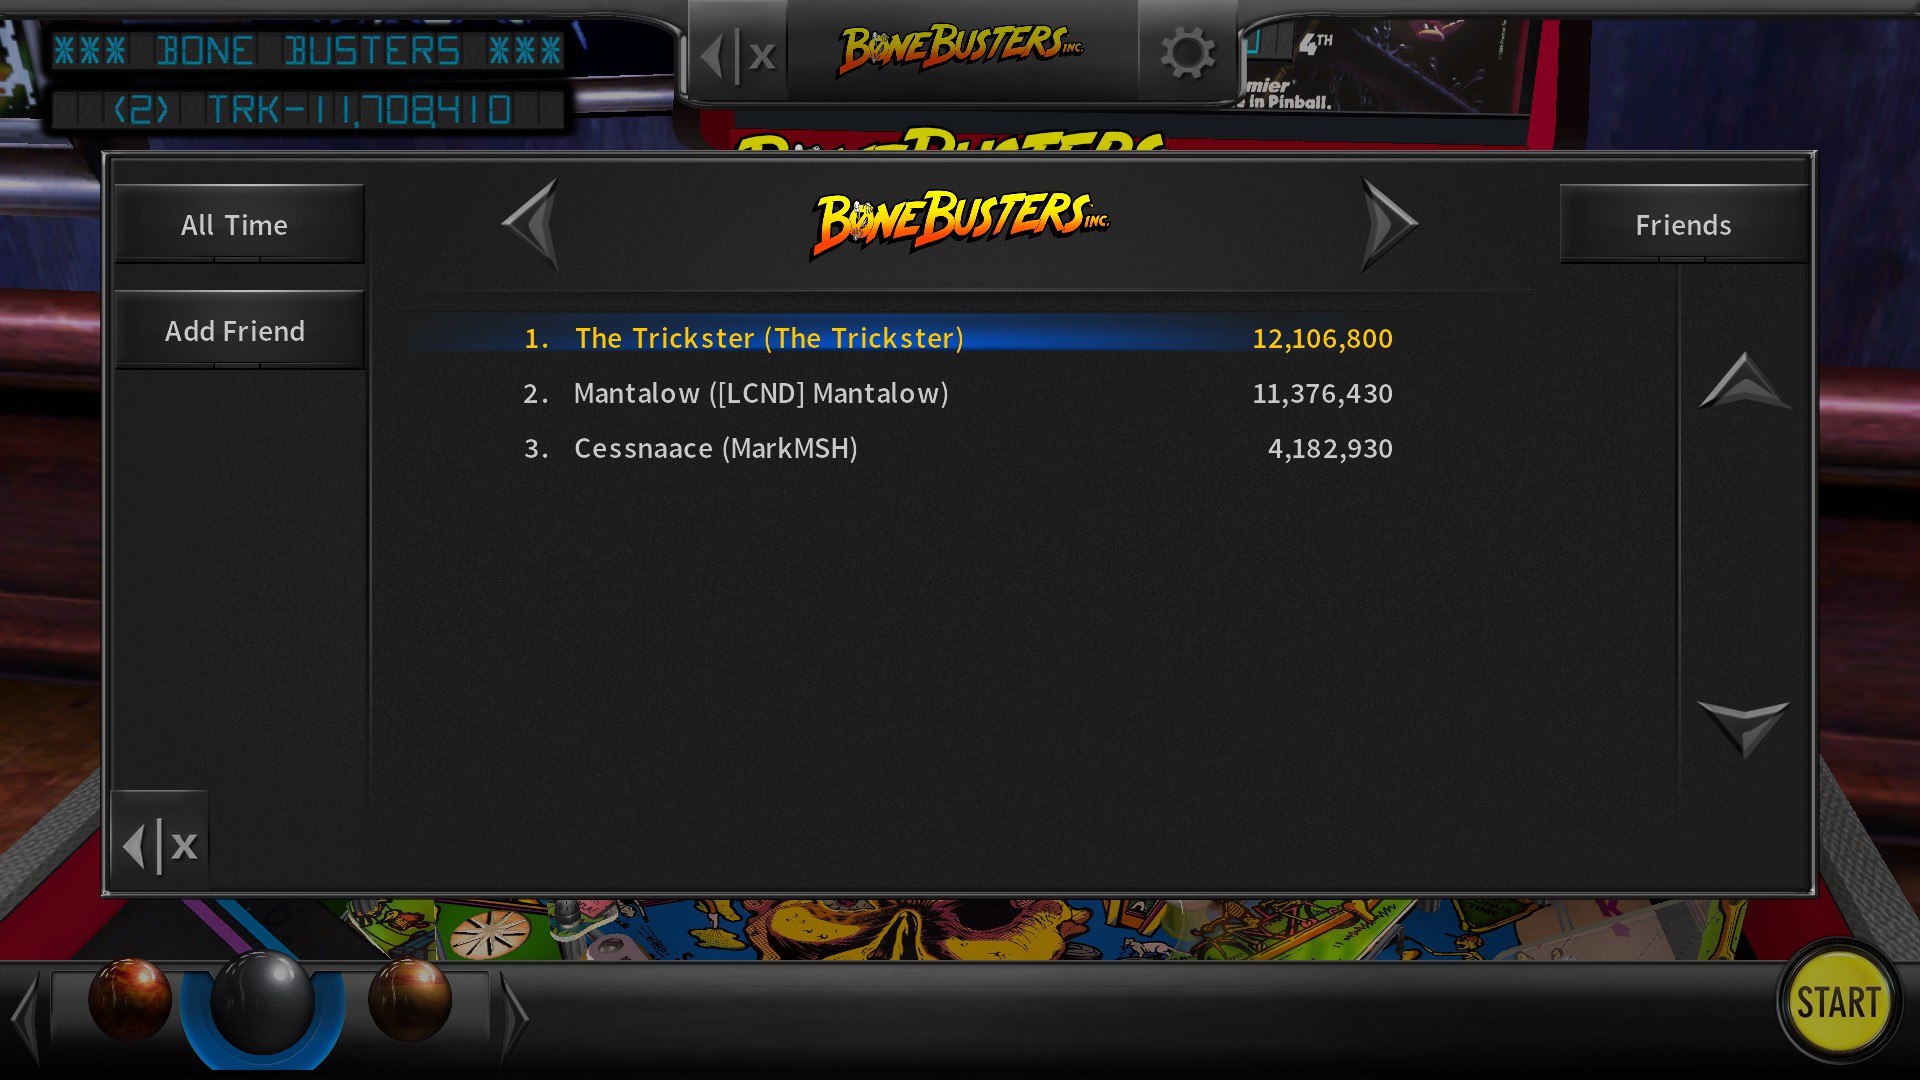 TheTrickster: Pinball Arcade: Bone Busters (PC) 12,106,800 points on 2016-11-23 04:52:43